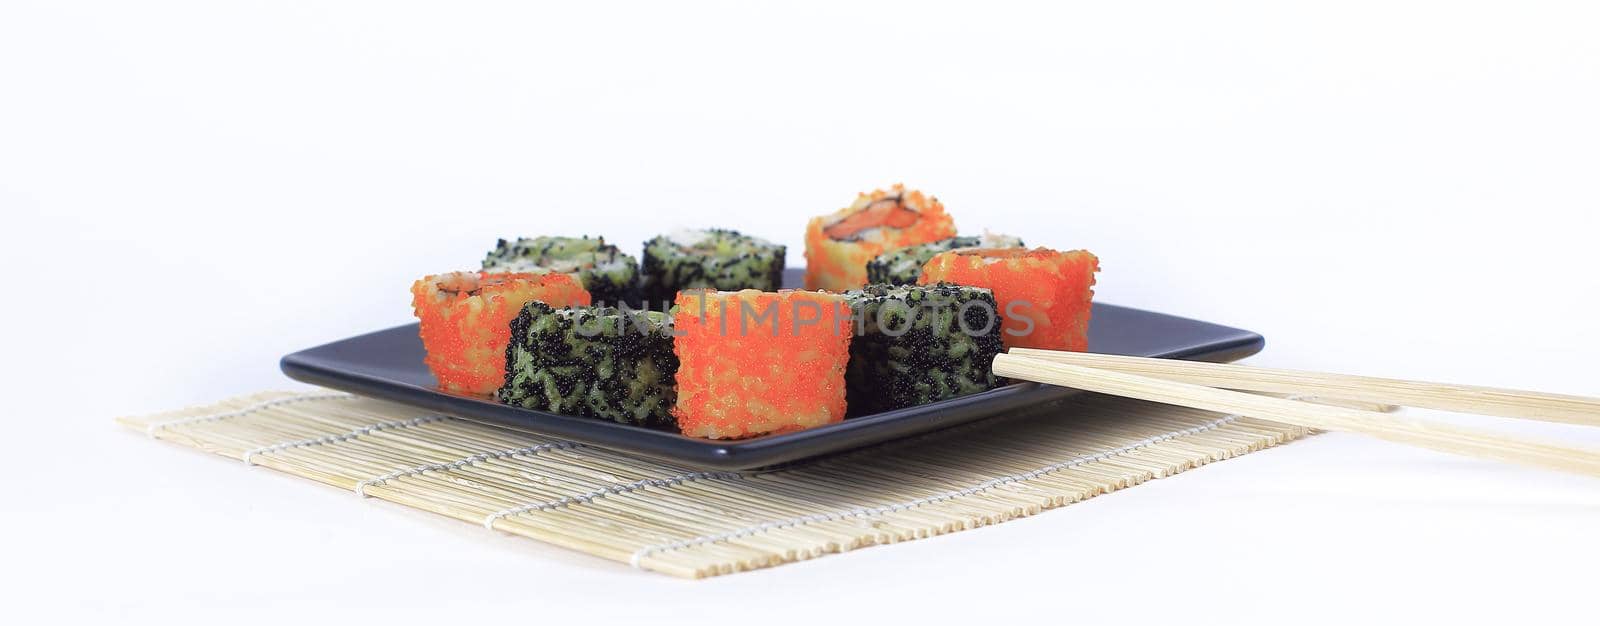 Sushi Set - different types of Maki sushi and chopsticks on a b by SmartPhotoLab